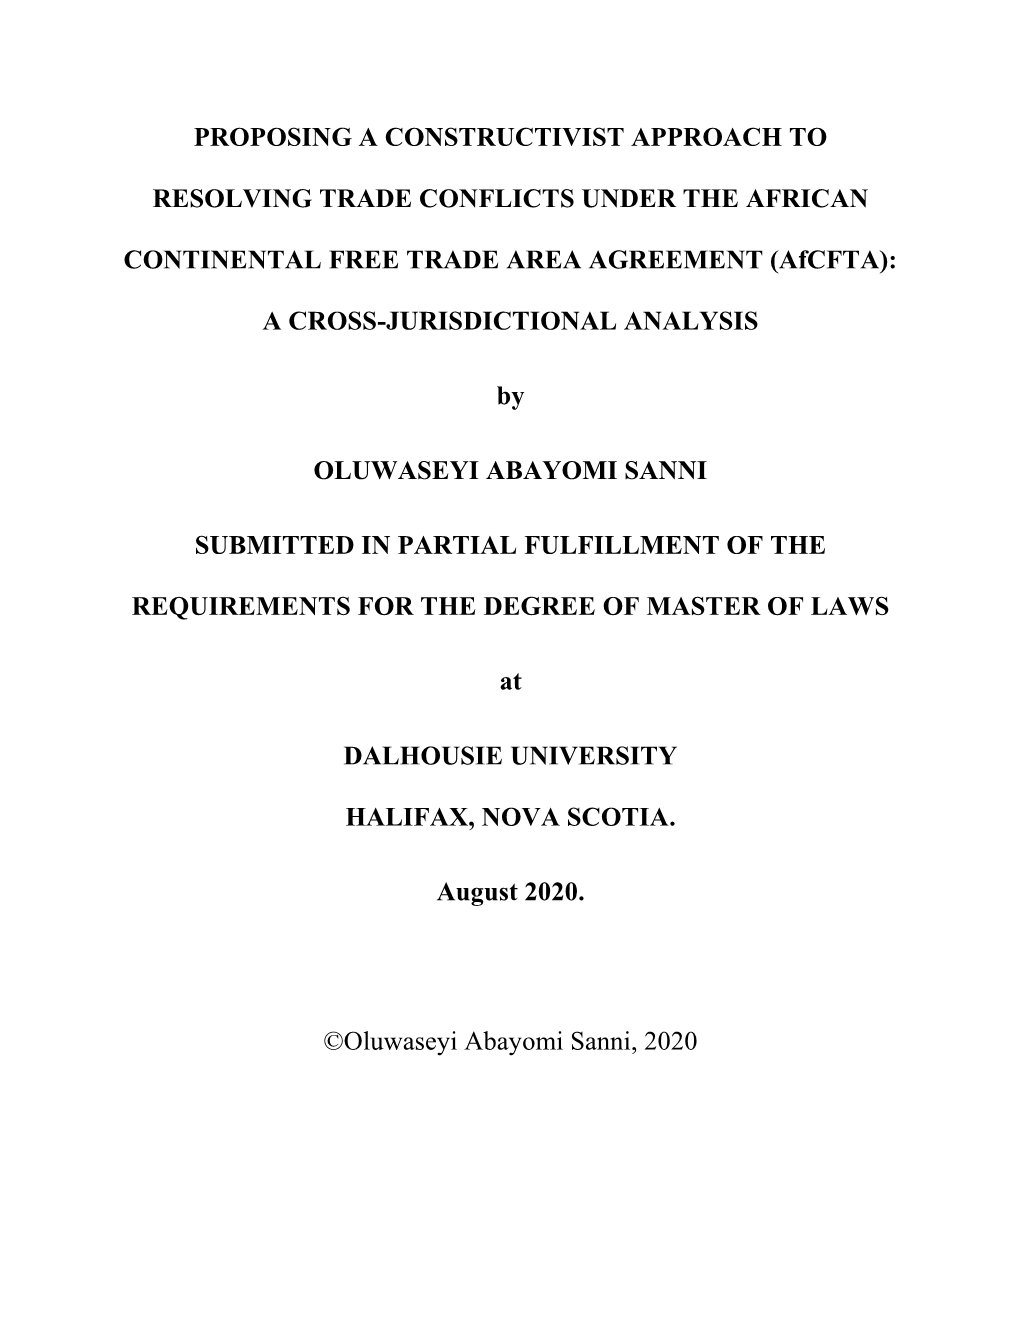 PROPOSING a CONSTRUCTIVIST APPROACH to RESOLVING TRADE CONFLICTS UNDER the AFRICAN CONTINENTAL FREE TRADE AREA AGREEMENT (Afcfta